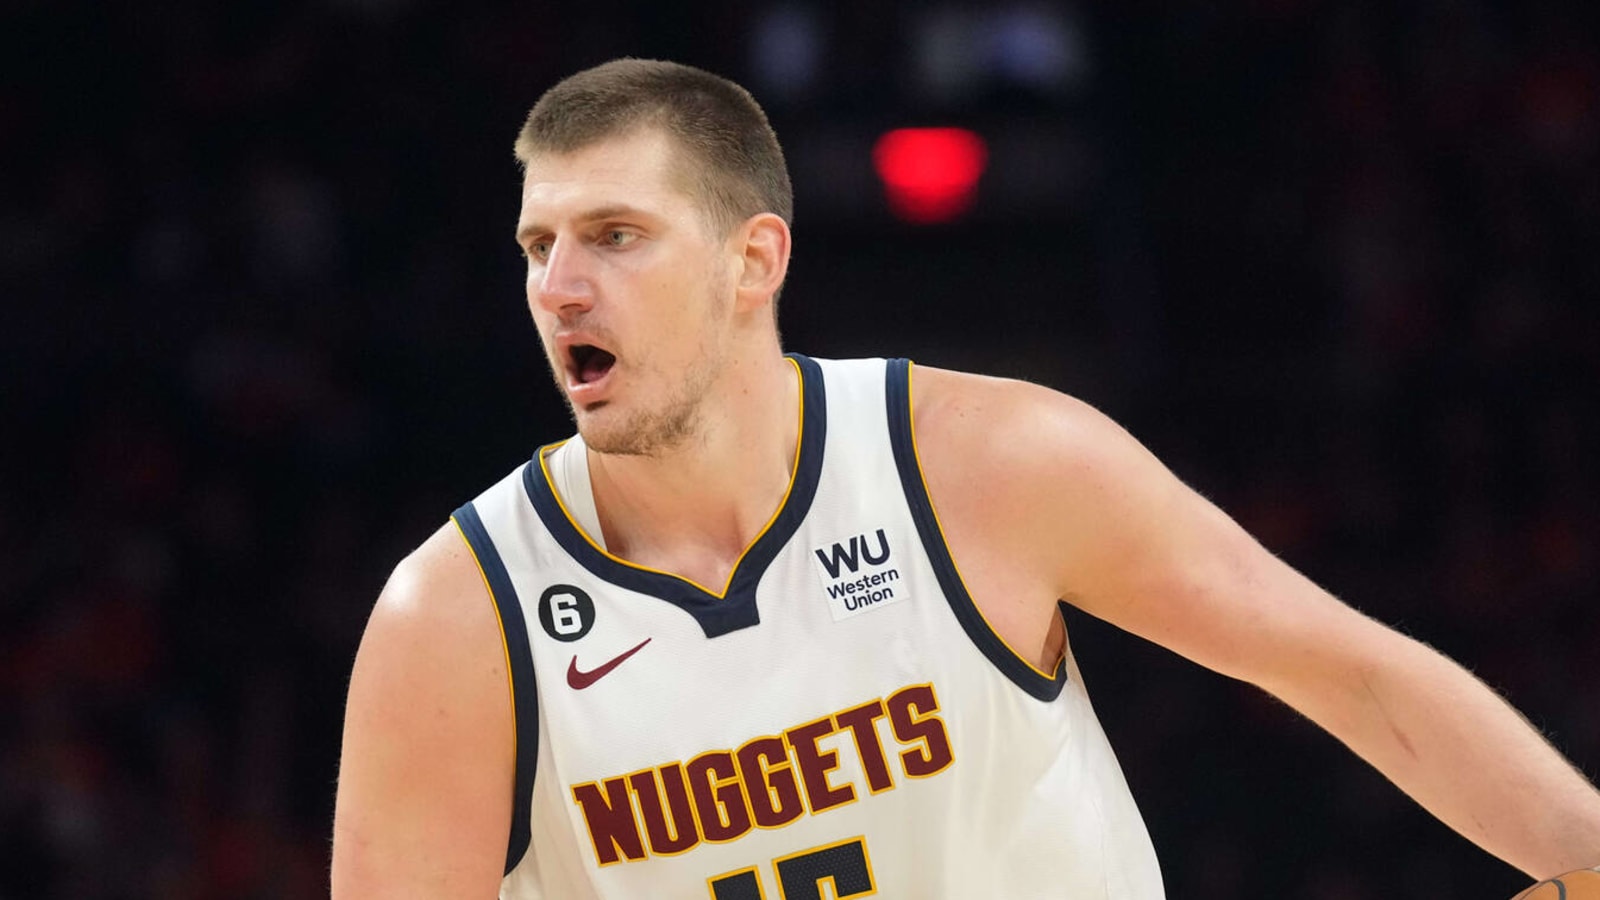 Lakers coach has funny response to question about defending Jokic